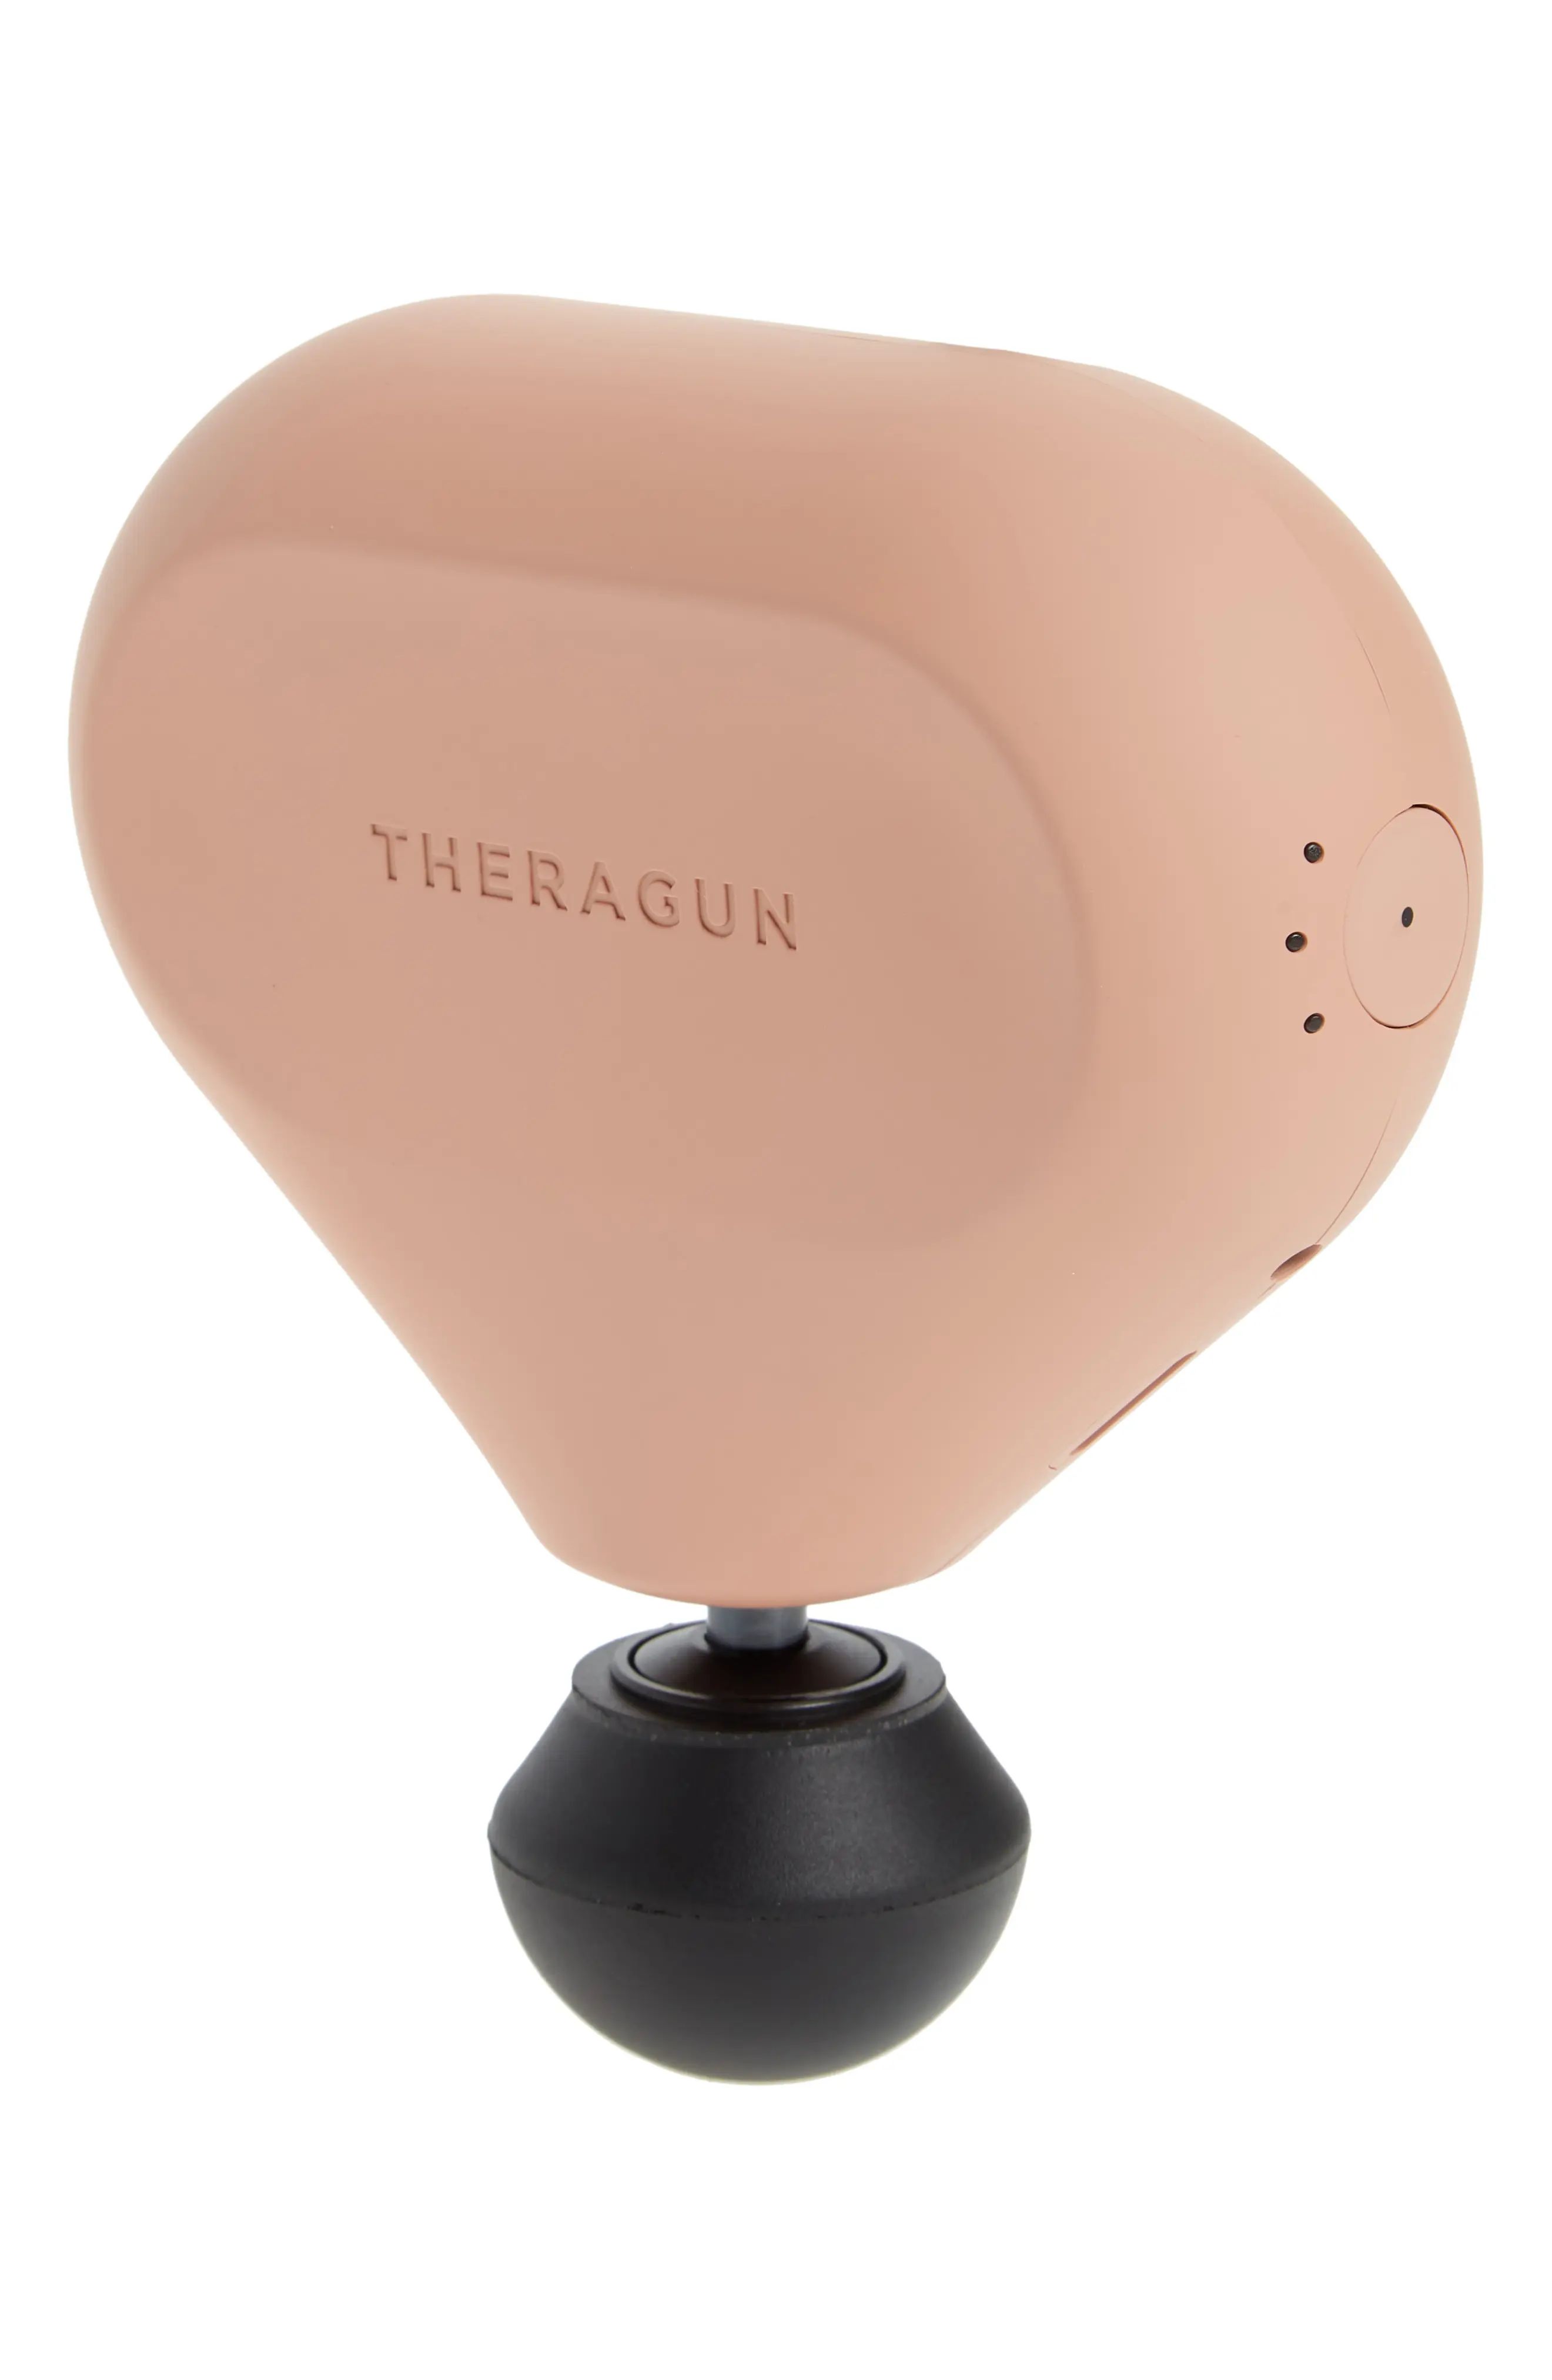 Therabody Theragun Mini Percussive Therapy Massager in Desert Rose at Nordstrom | Nordstrom